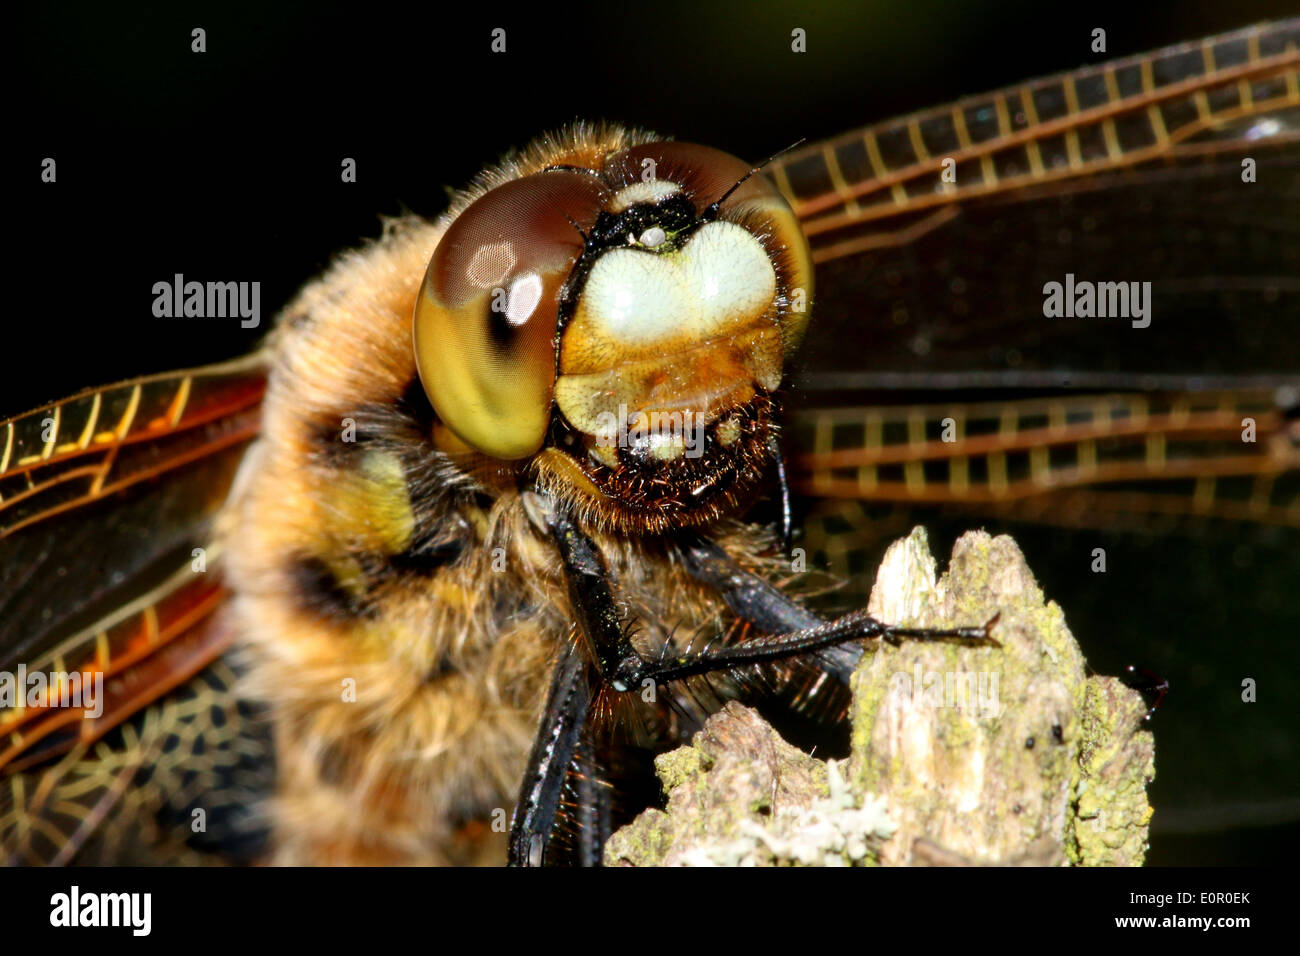 Extreme close-up of the head of a Four-spotted Chaser (Libellula quadrimaculata)  dragonfly Stock Photo